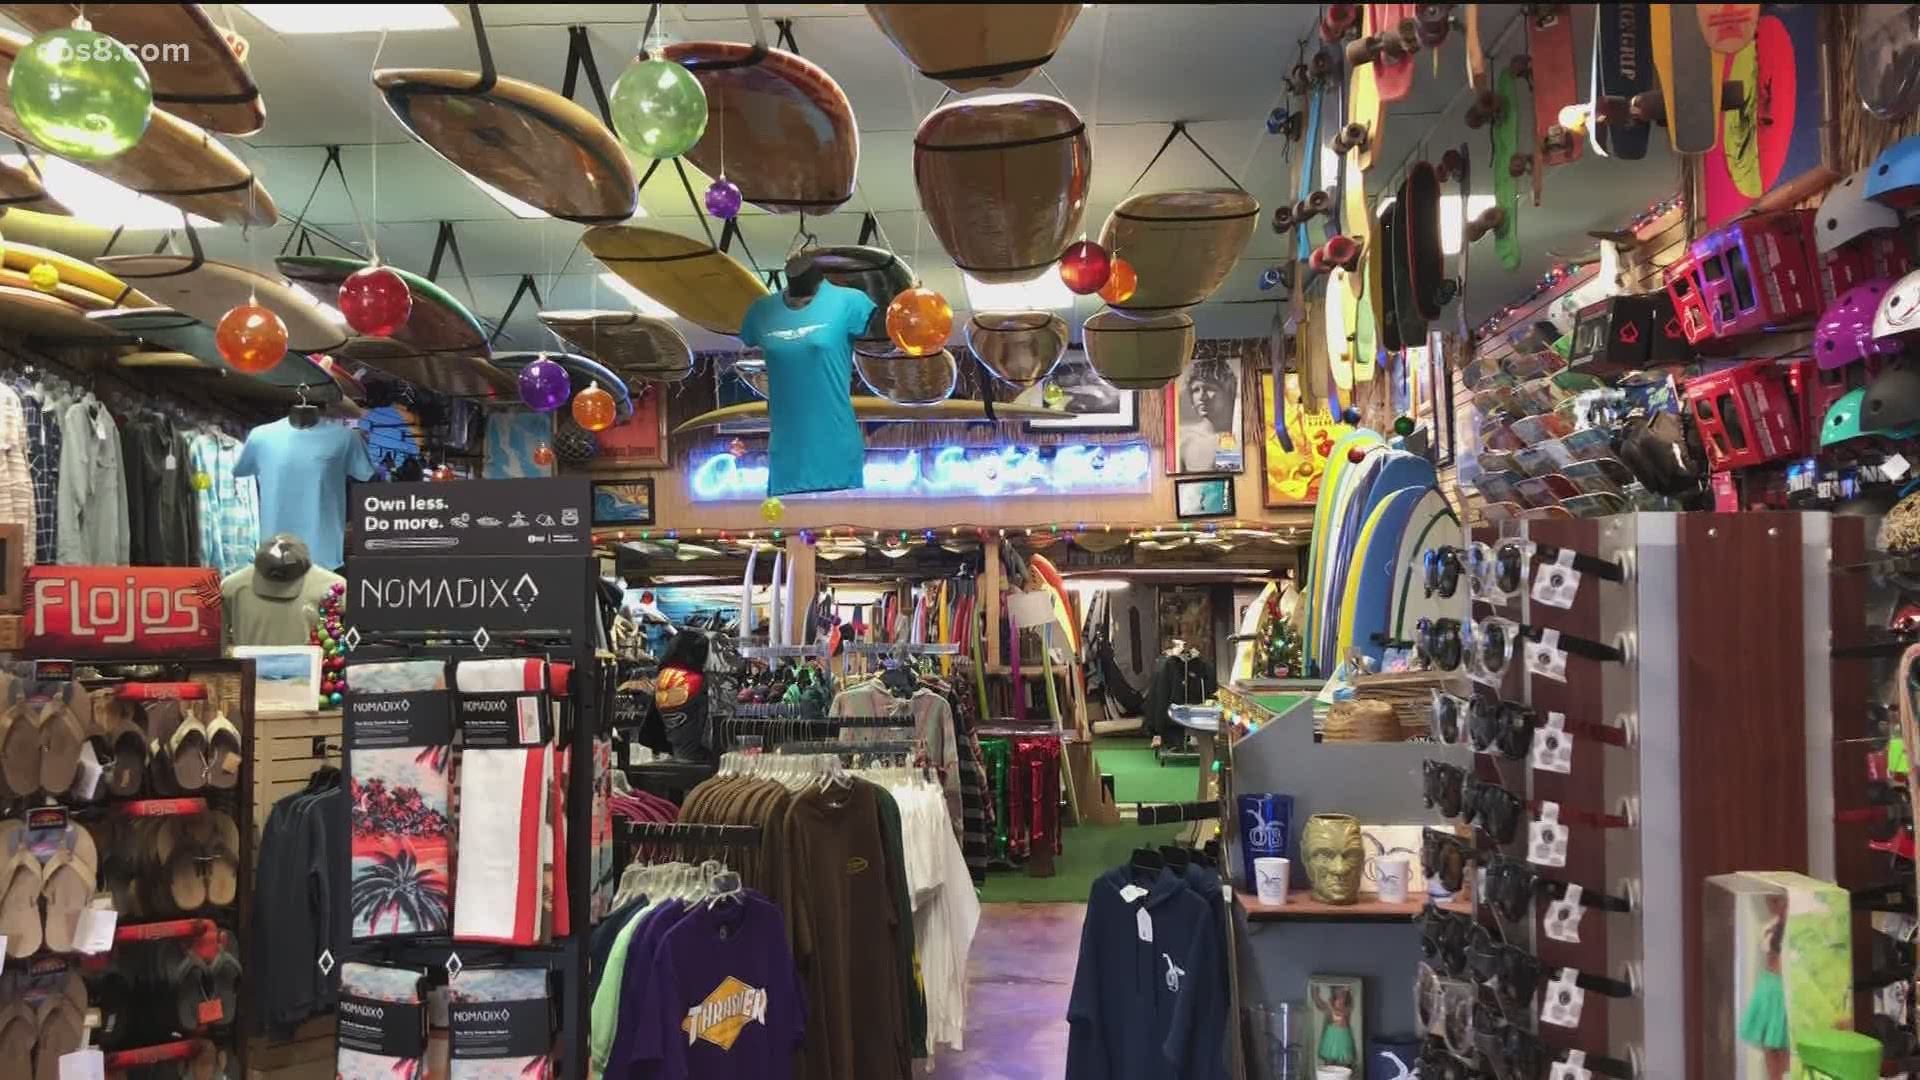 OB Surf and Skate Shop is located in the heart of Ocean Beach and is only two blocks from the beach. It is a one-stop-shop for rentals, souvenirs, surf and skate les